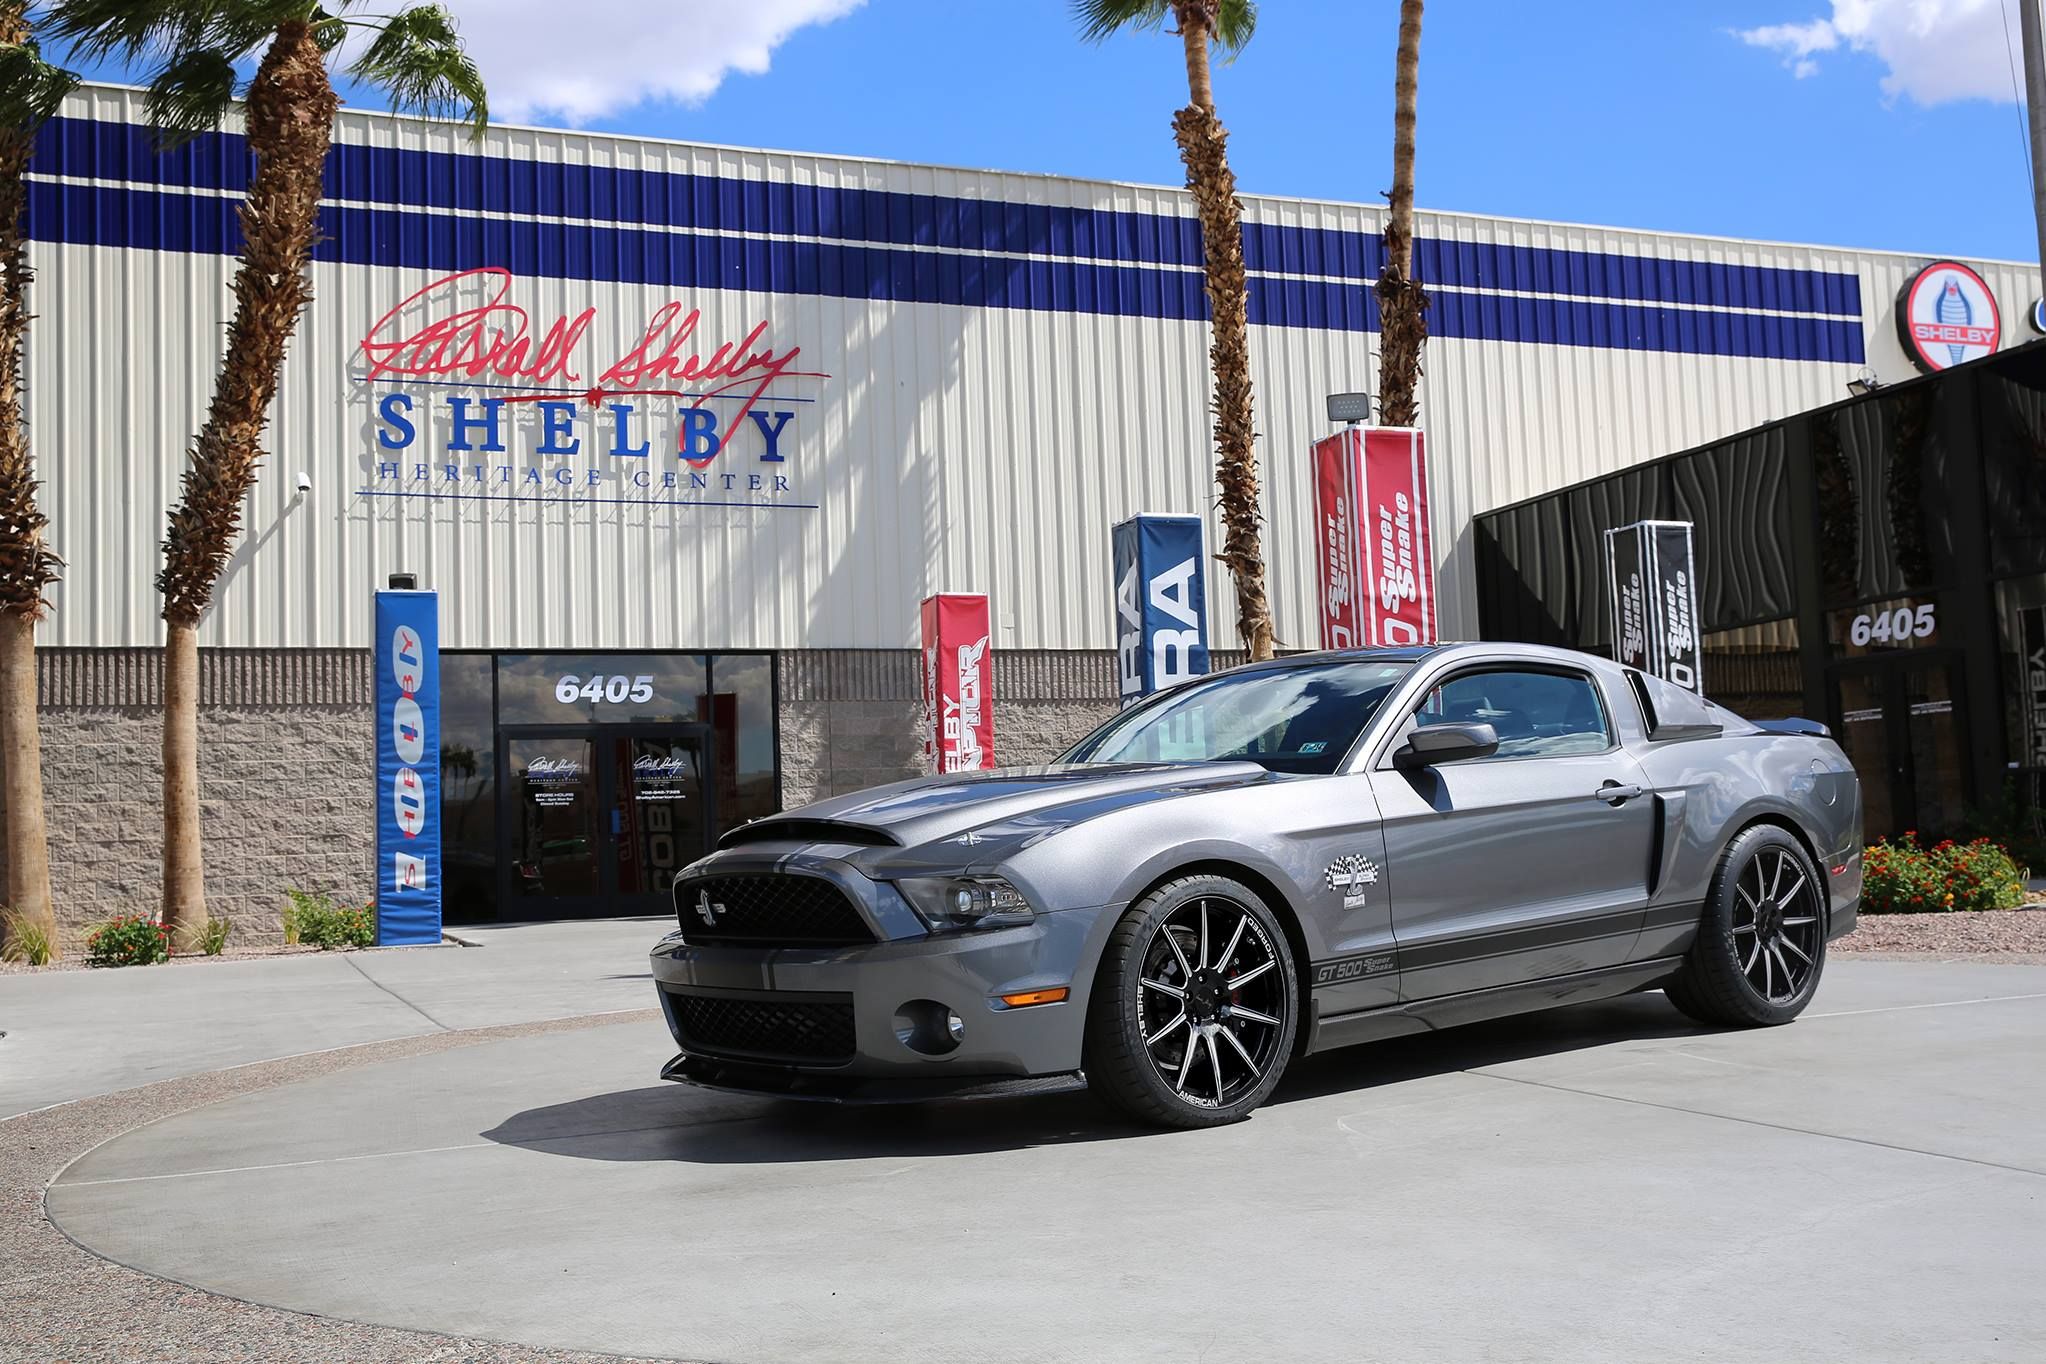 2007 - 2014 Ford Shelby GT500 Super Snake Signature Edition by Shelby American